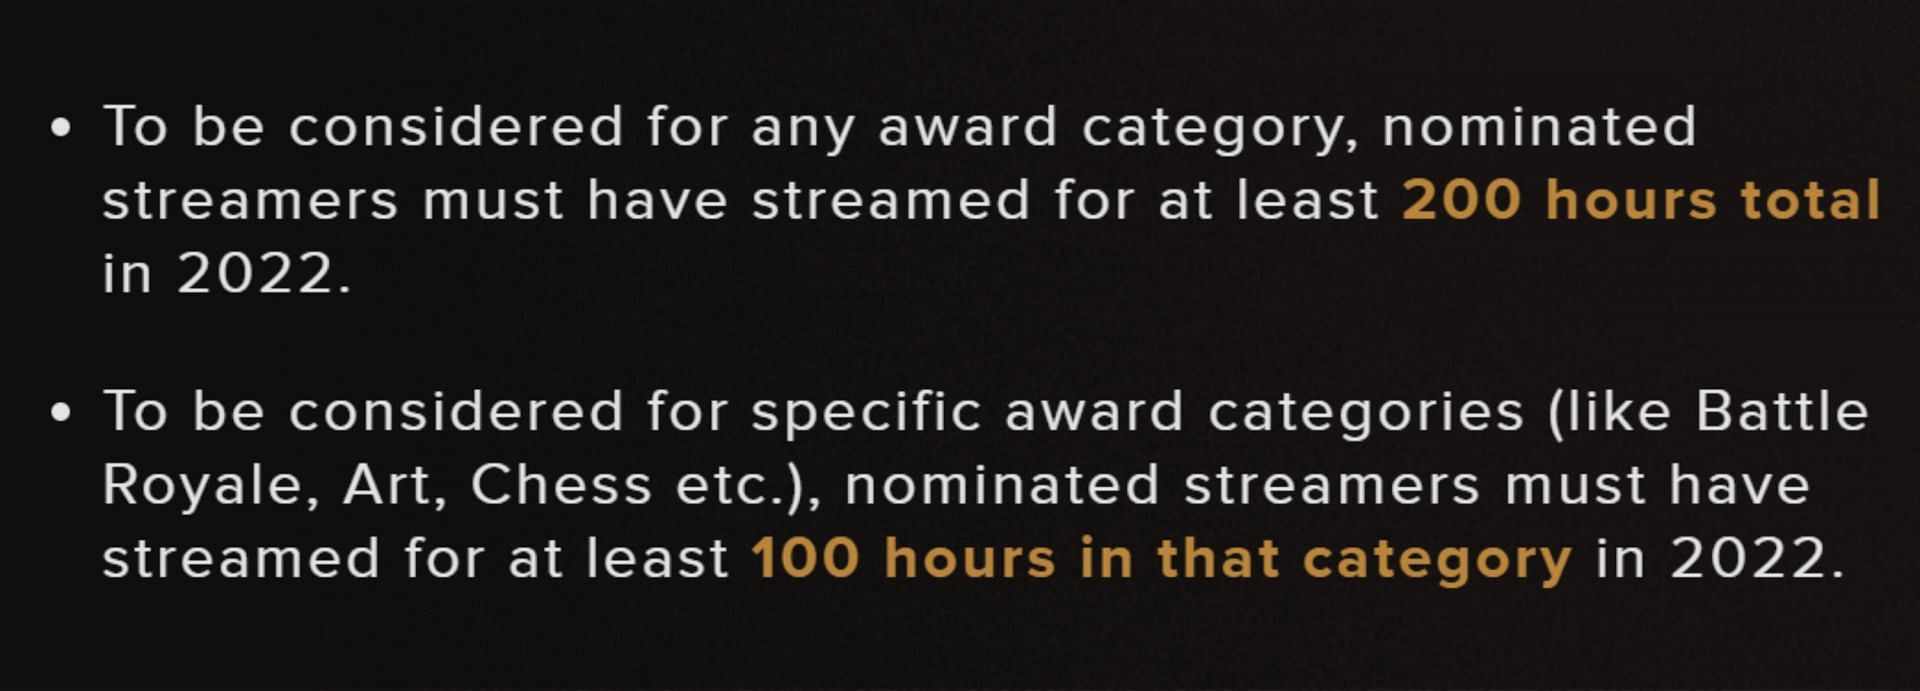 Streamer Awards 2023 Nominations, categories, livestream date, and